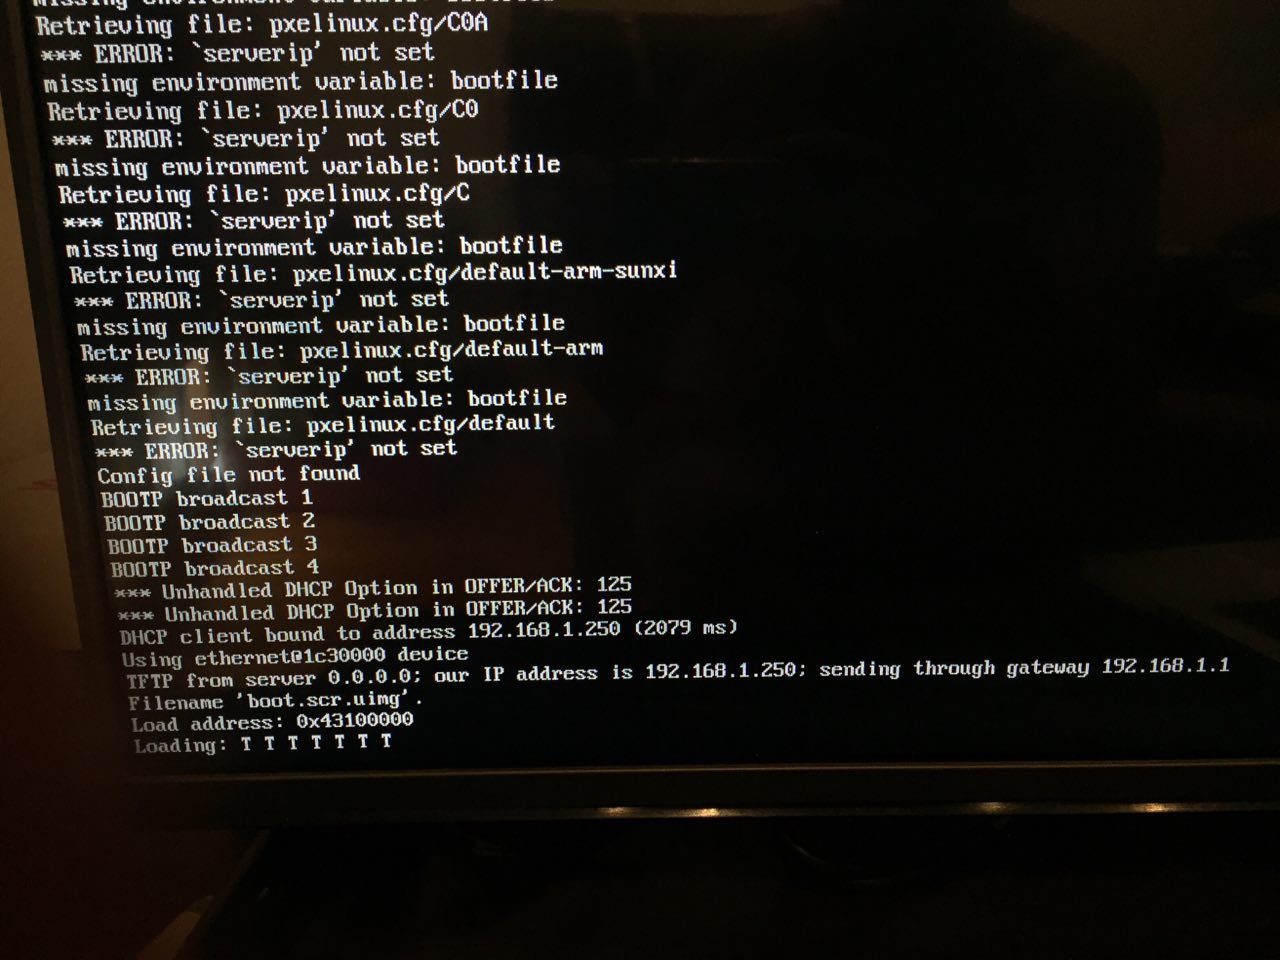 How to install Linux on the eMMC of an Orange Pi 3 LTS - Jumptuck